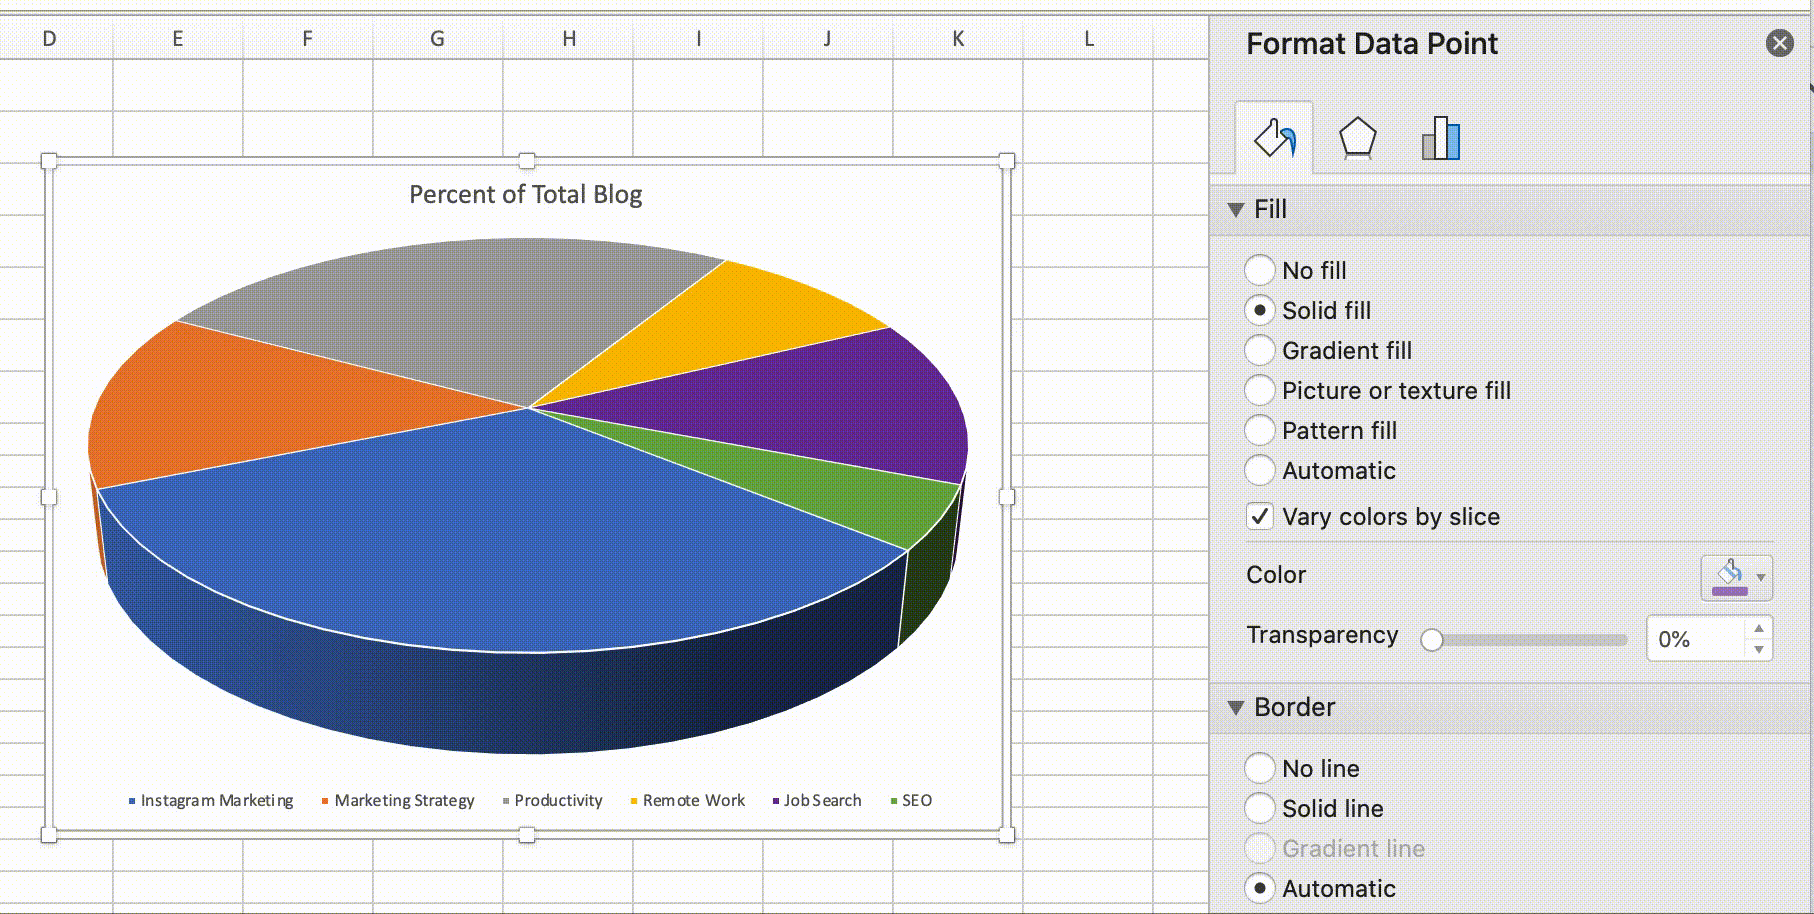 pie chart template excel